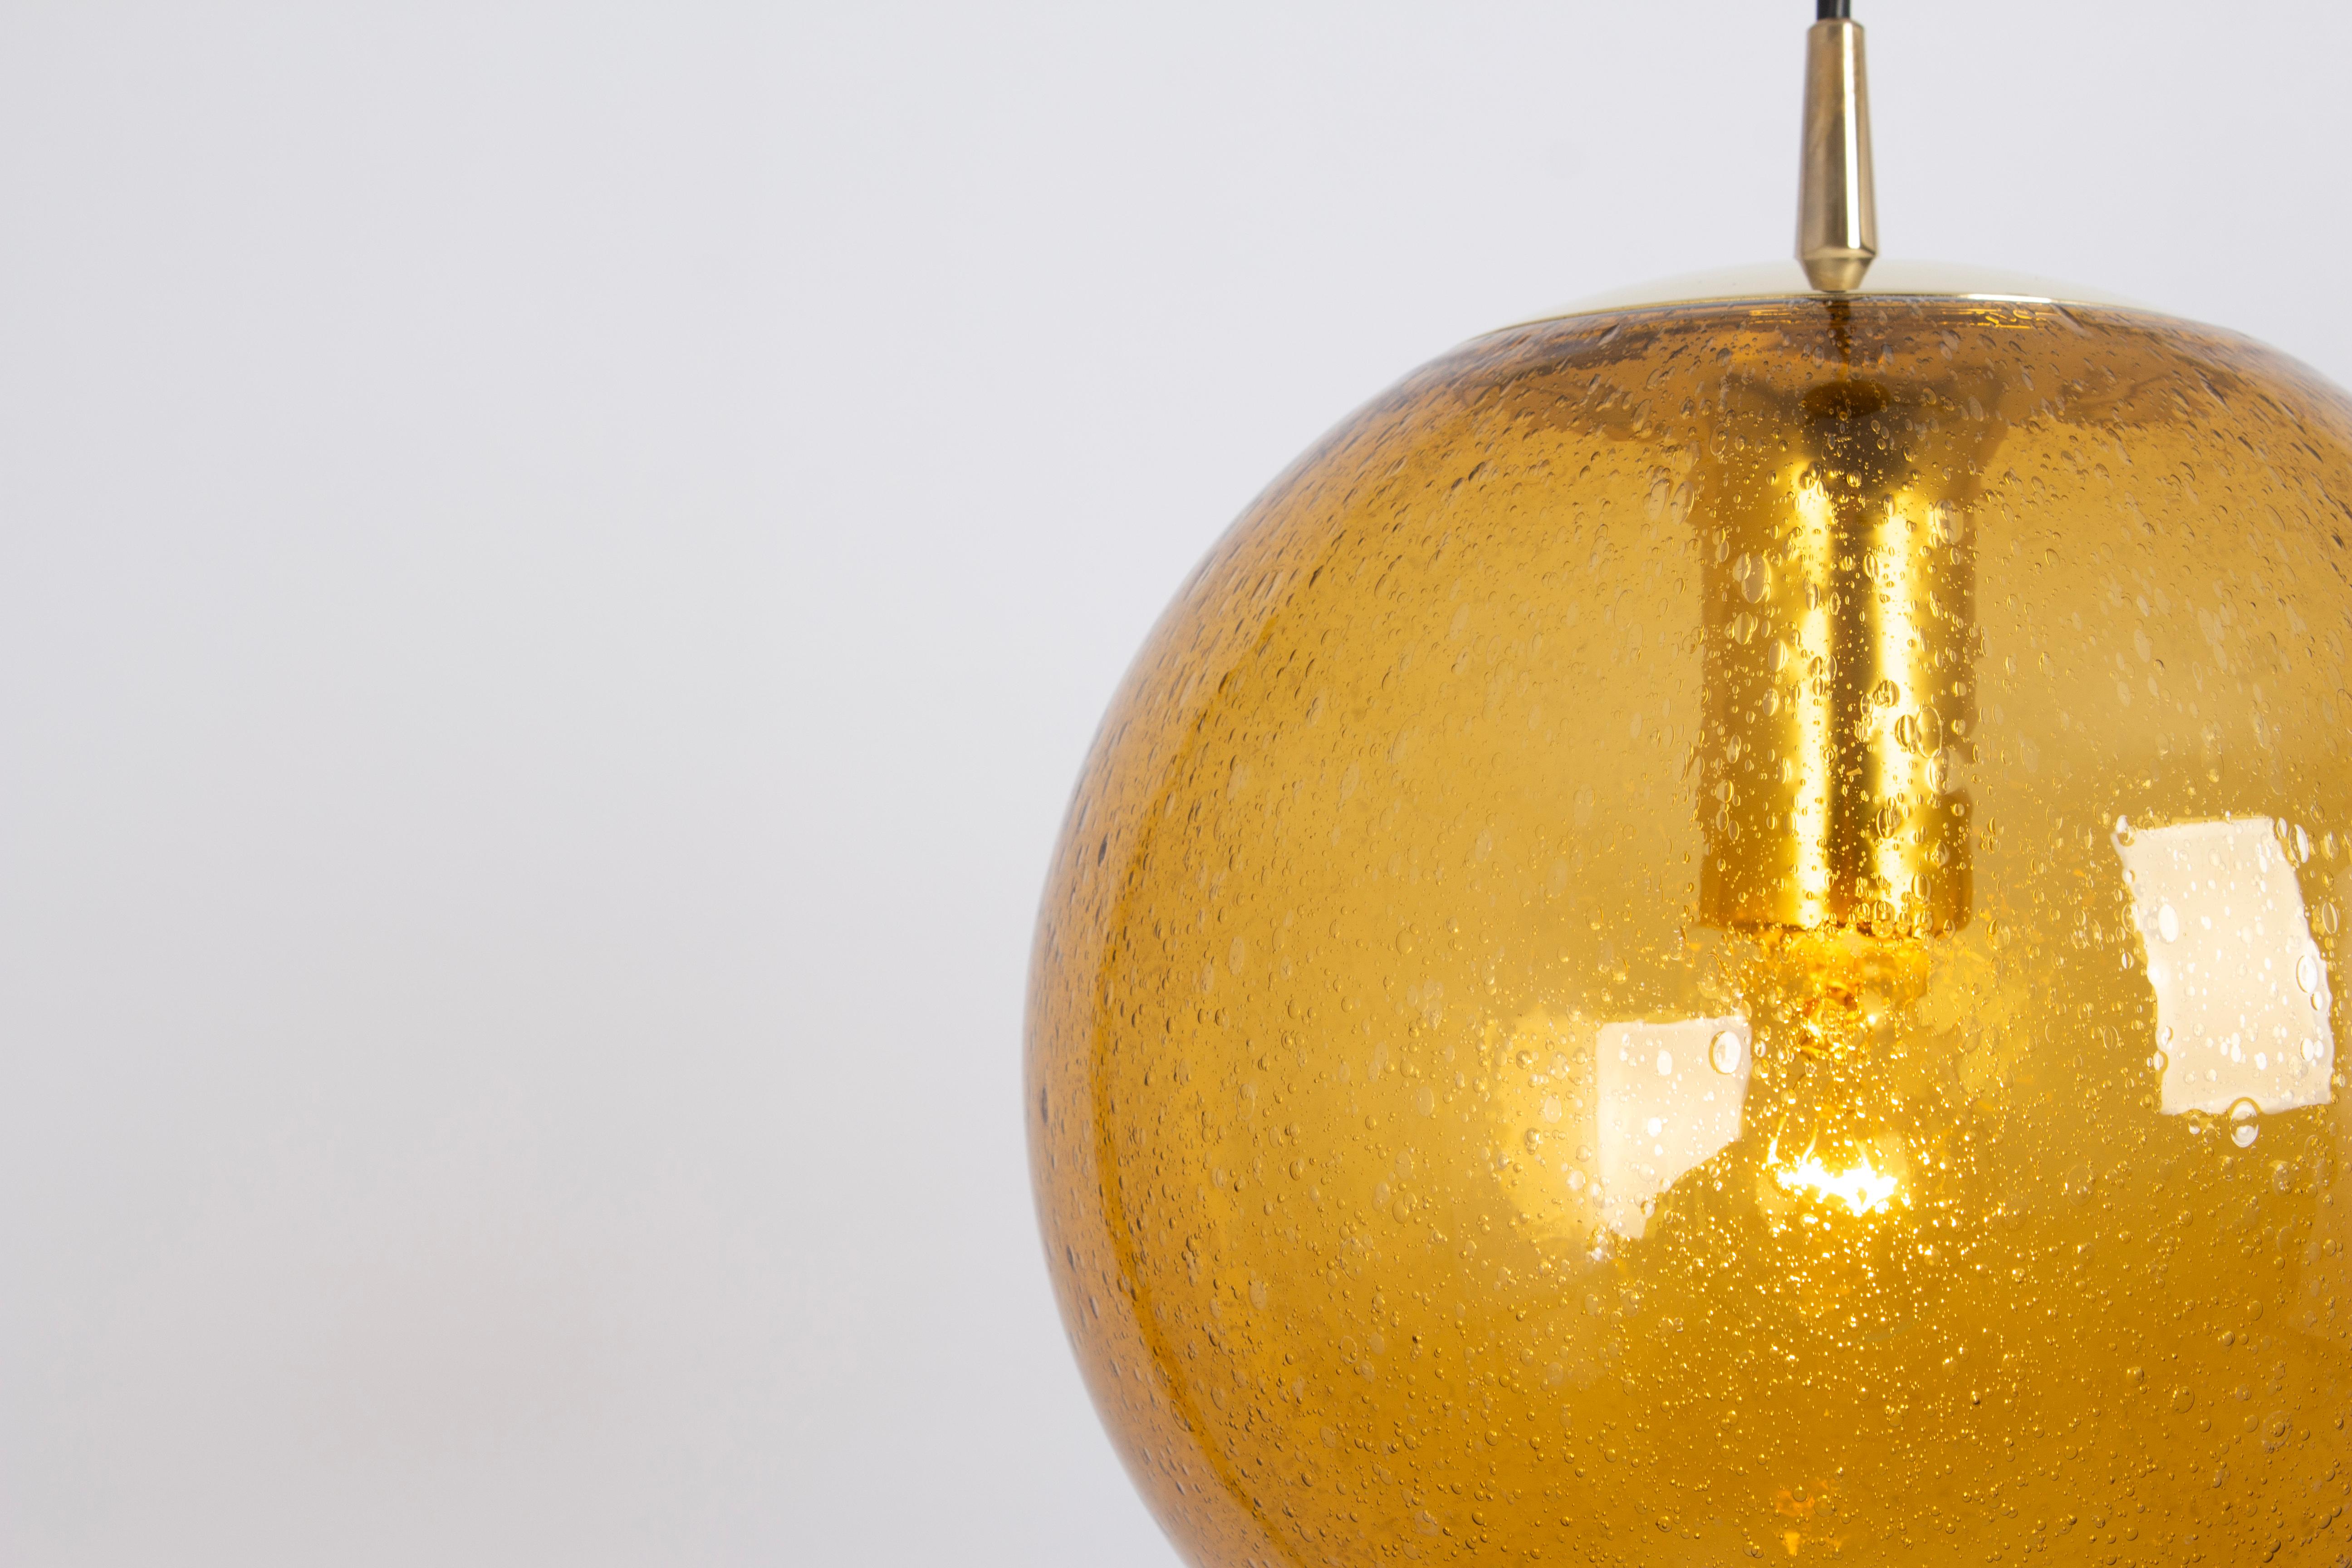 A special round dark yellow glass pendant designed by Peill & Putzler, manufactured in Germany, circa 1970s.
High quality and in very good condition. Cleaned, well-wired, and ready to use. 
Each fixture requires a 1 x E27 Standard bulb 
Light bulbs